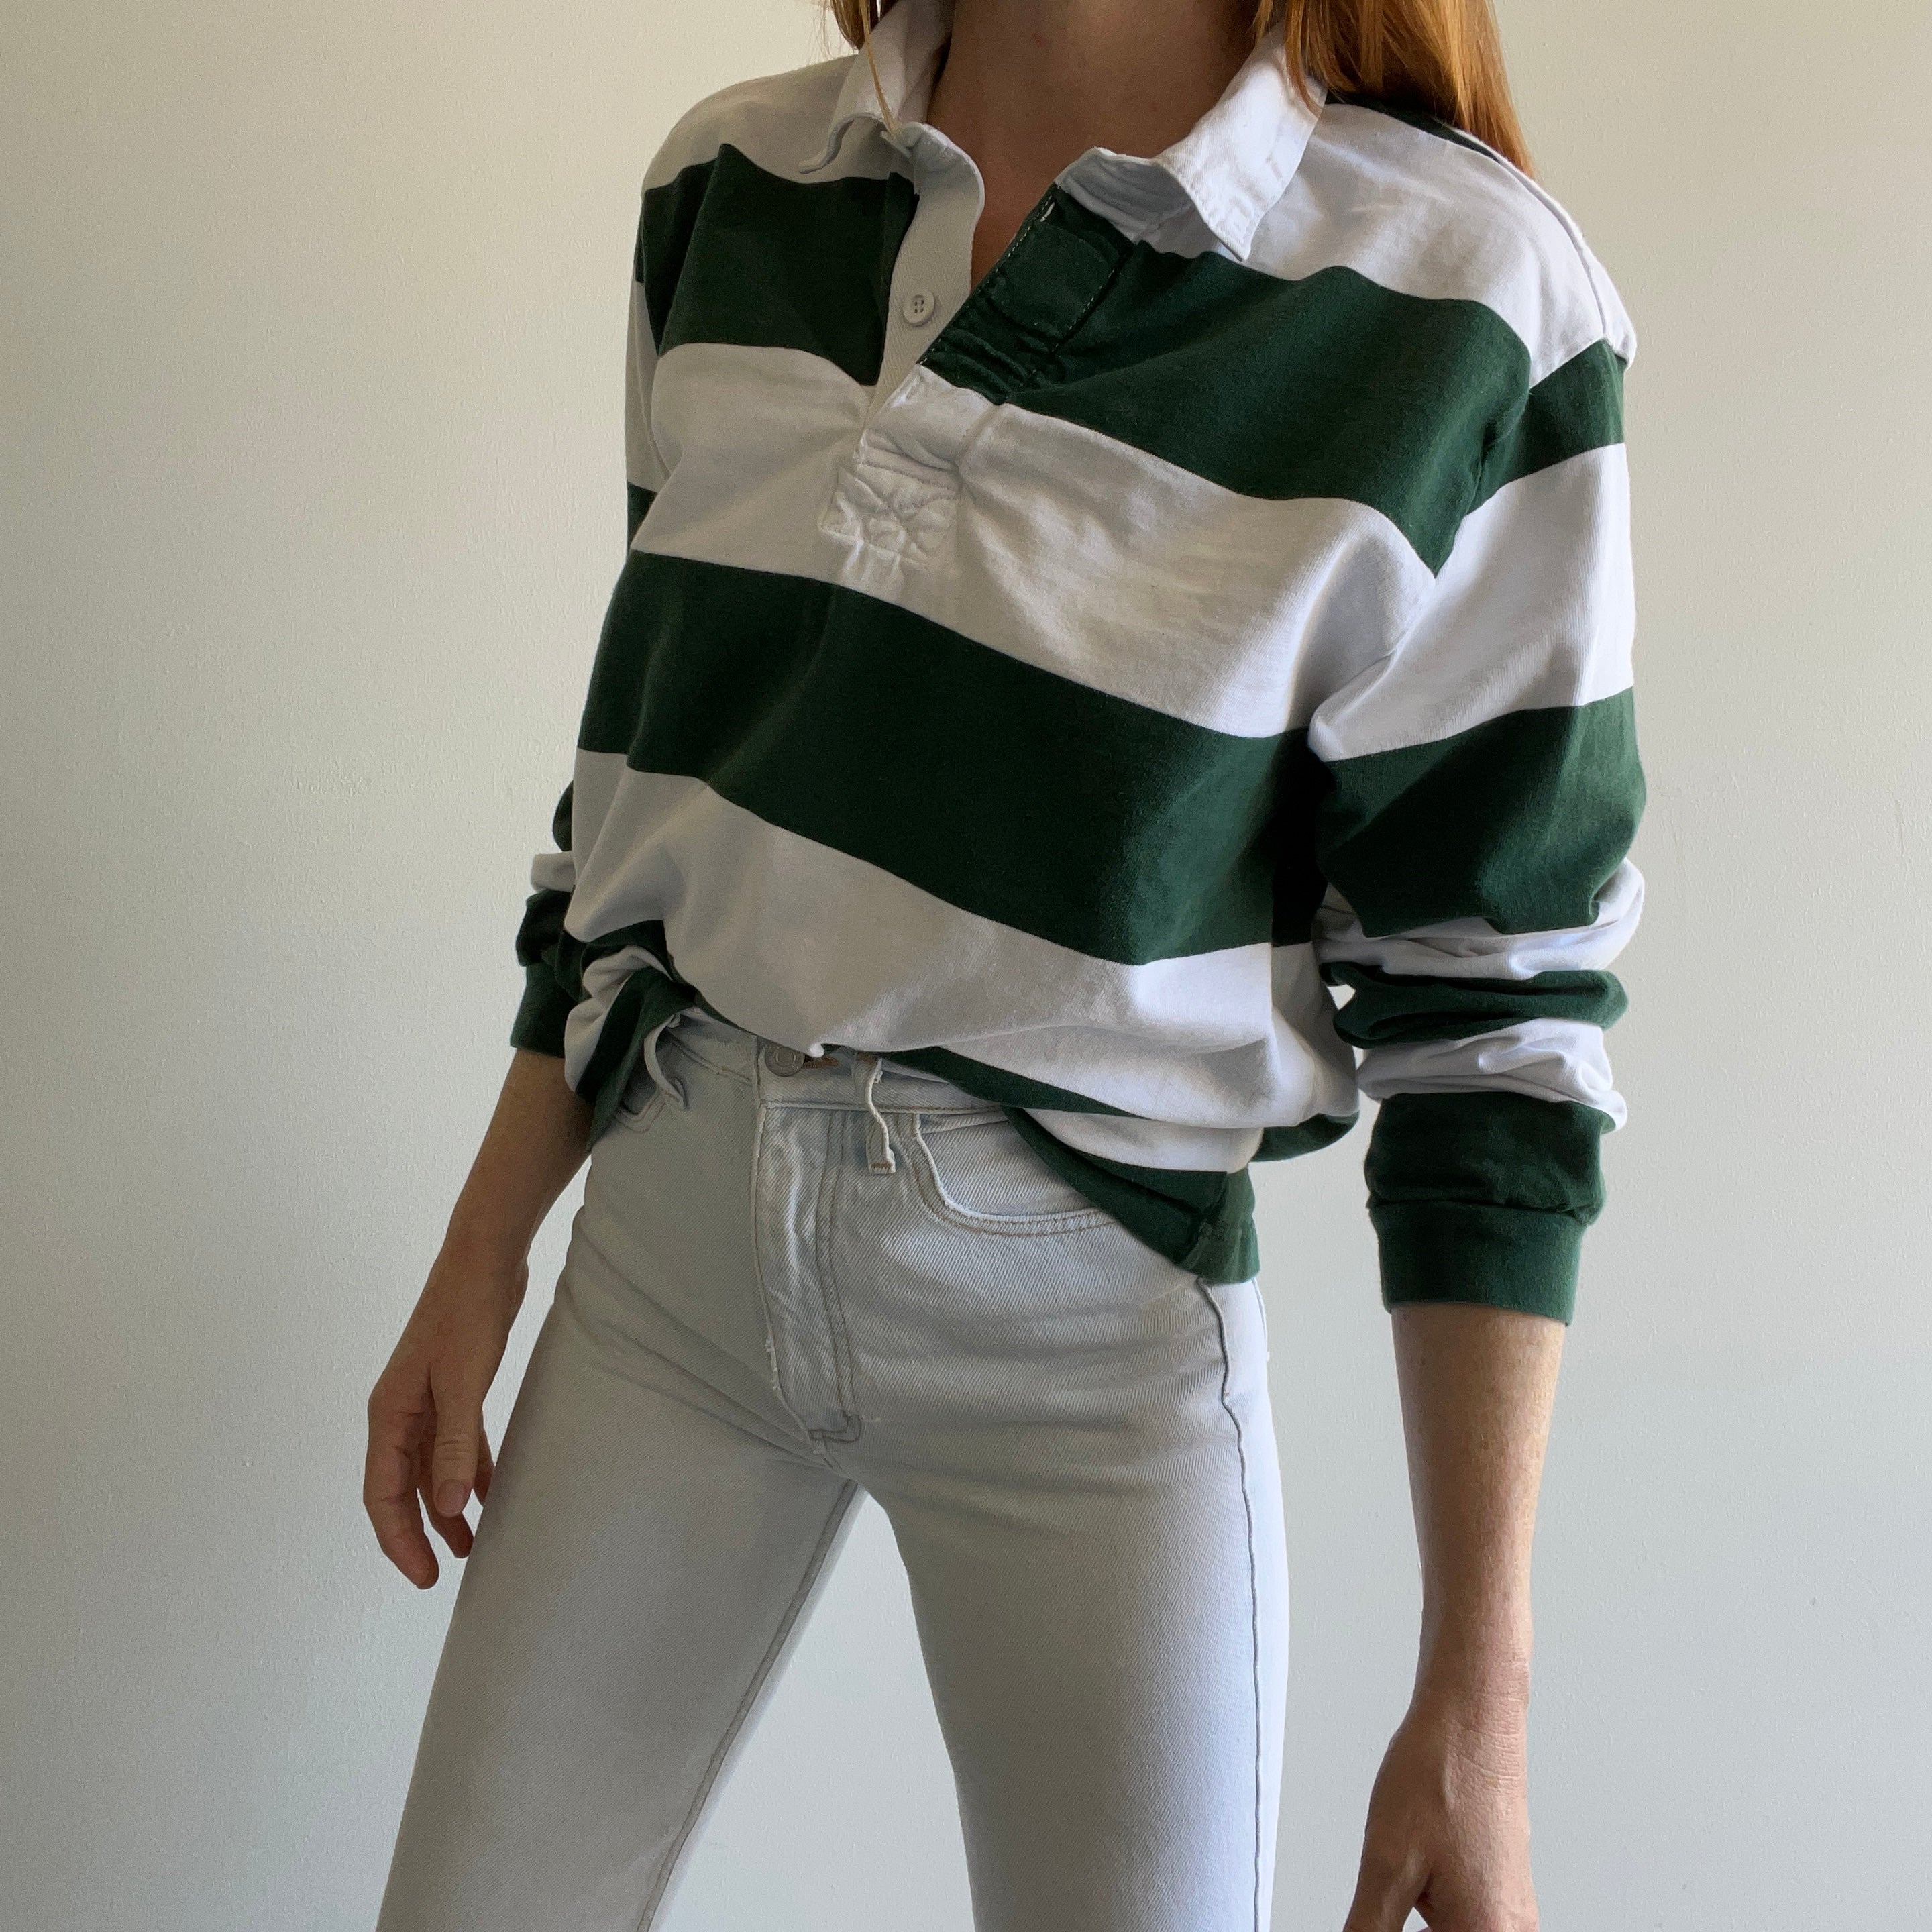 1980s Green and White Rugby Shirt